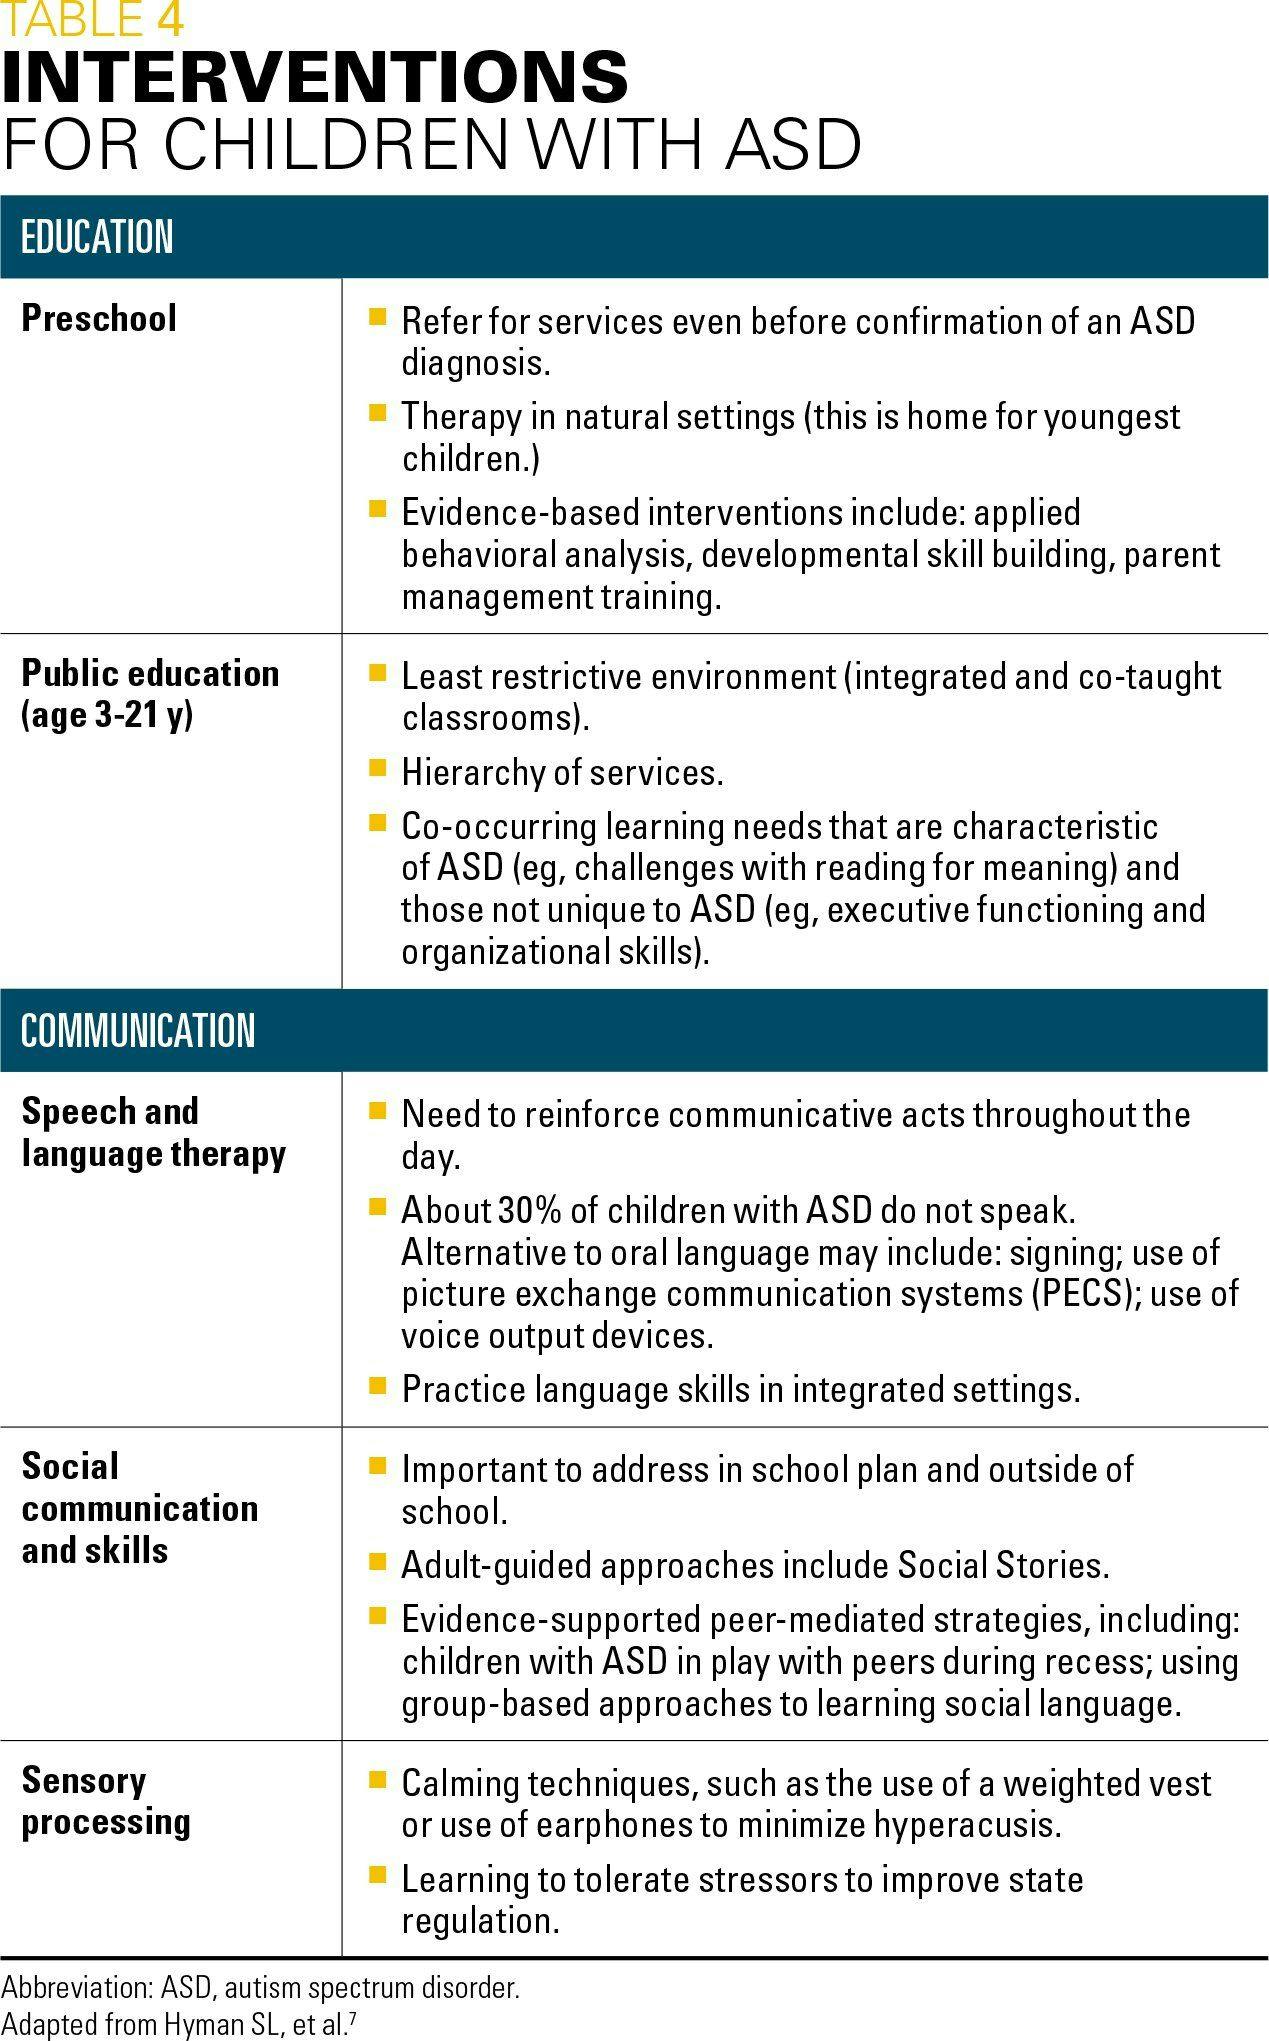 Interventions for children with ASD